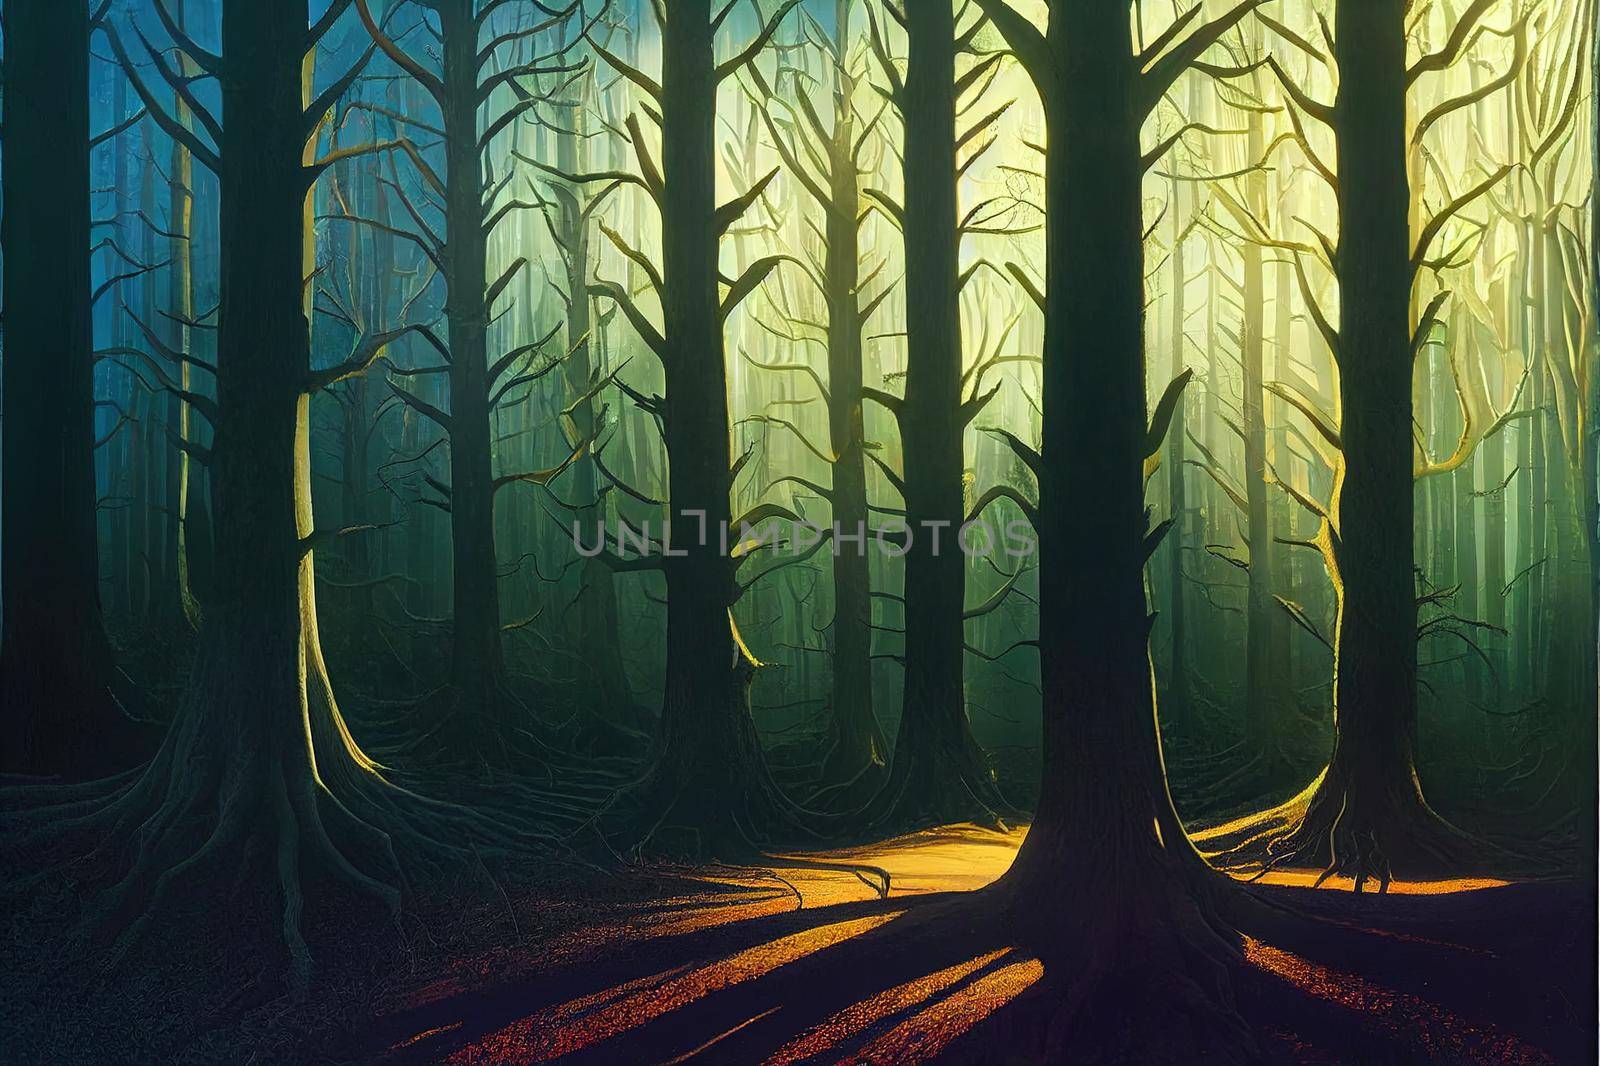 Dark mystical forest, the rays of the sun pass through the trees, shadows. Big old tree in the center, magical glow. Beautiful forest fantasy landscape. Unreal world. 3D illustration.. High quality illustration